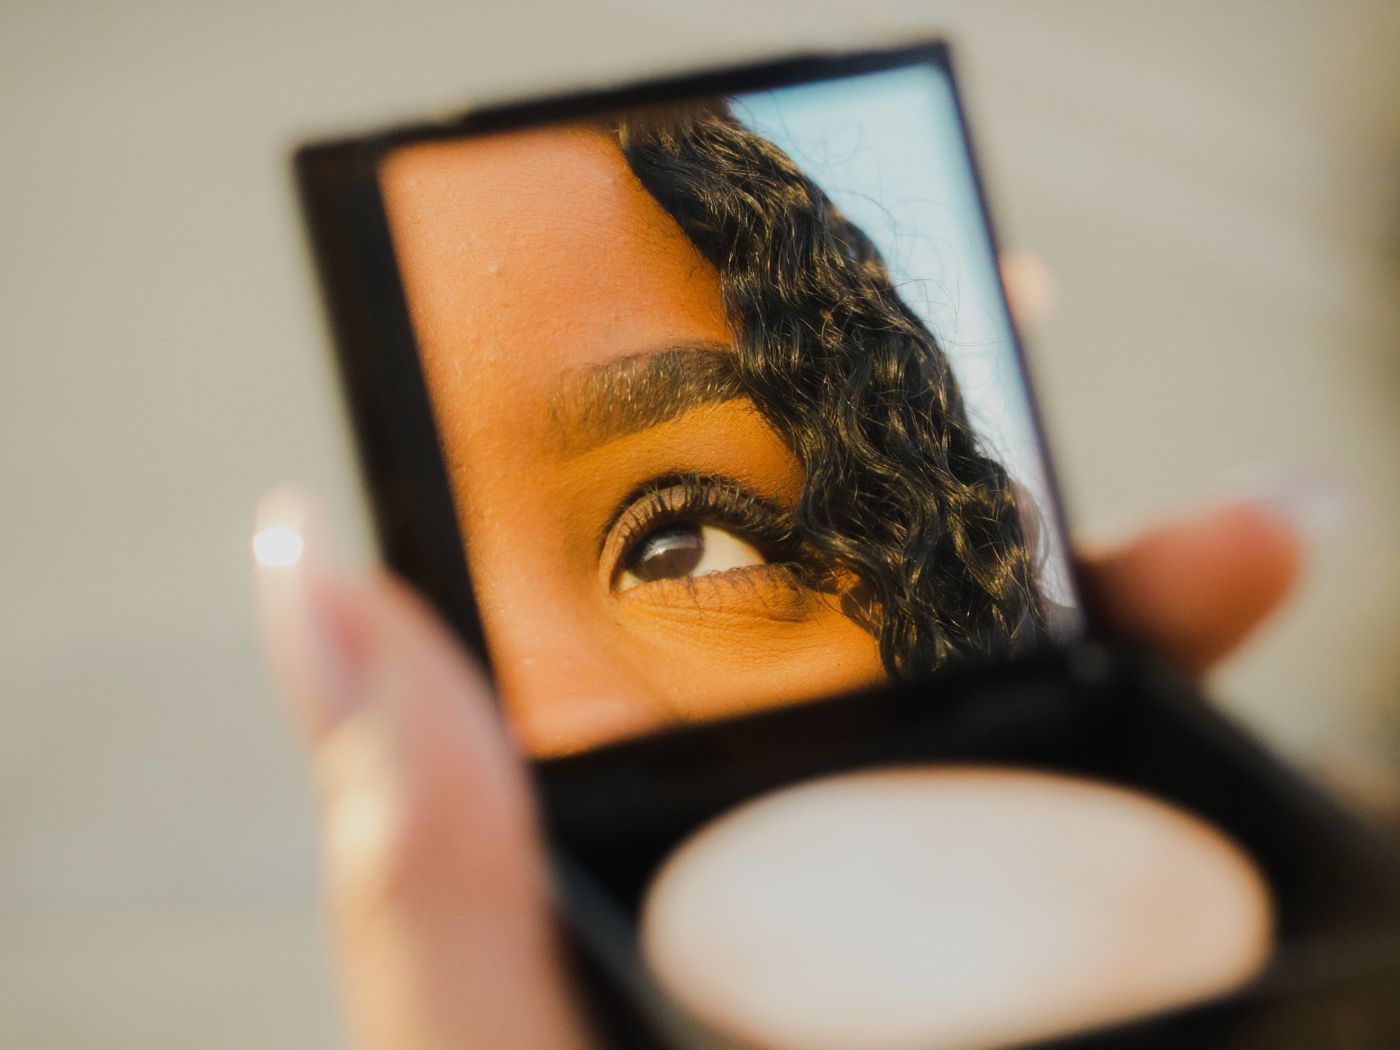 Mirror and foundation compact with woman's eye and brow appearing in the mirror